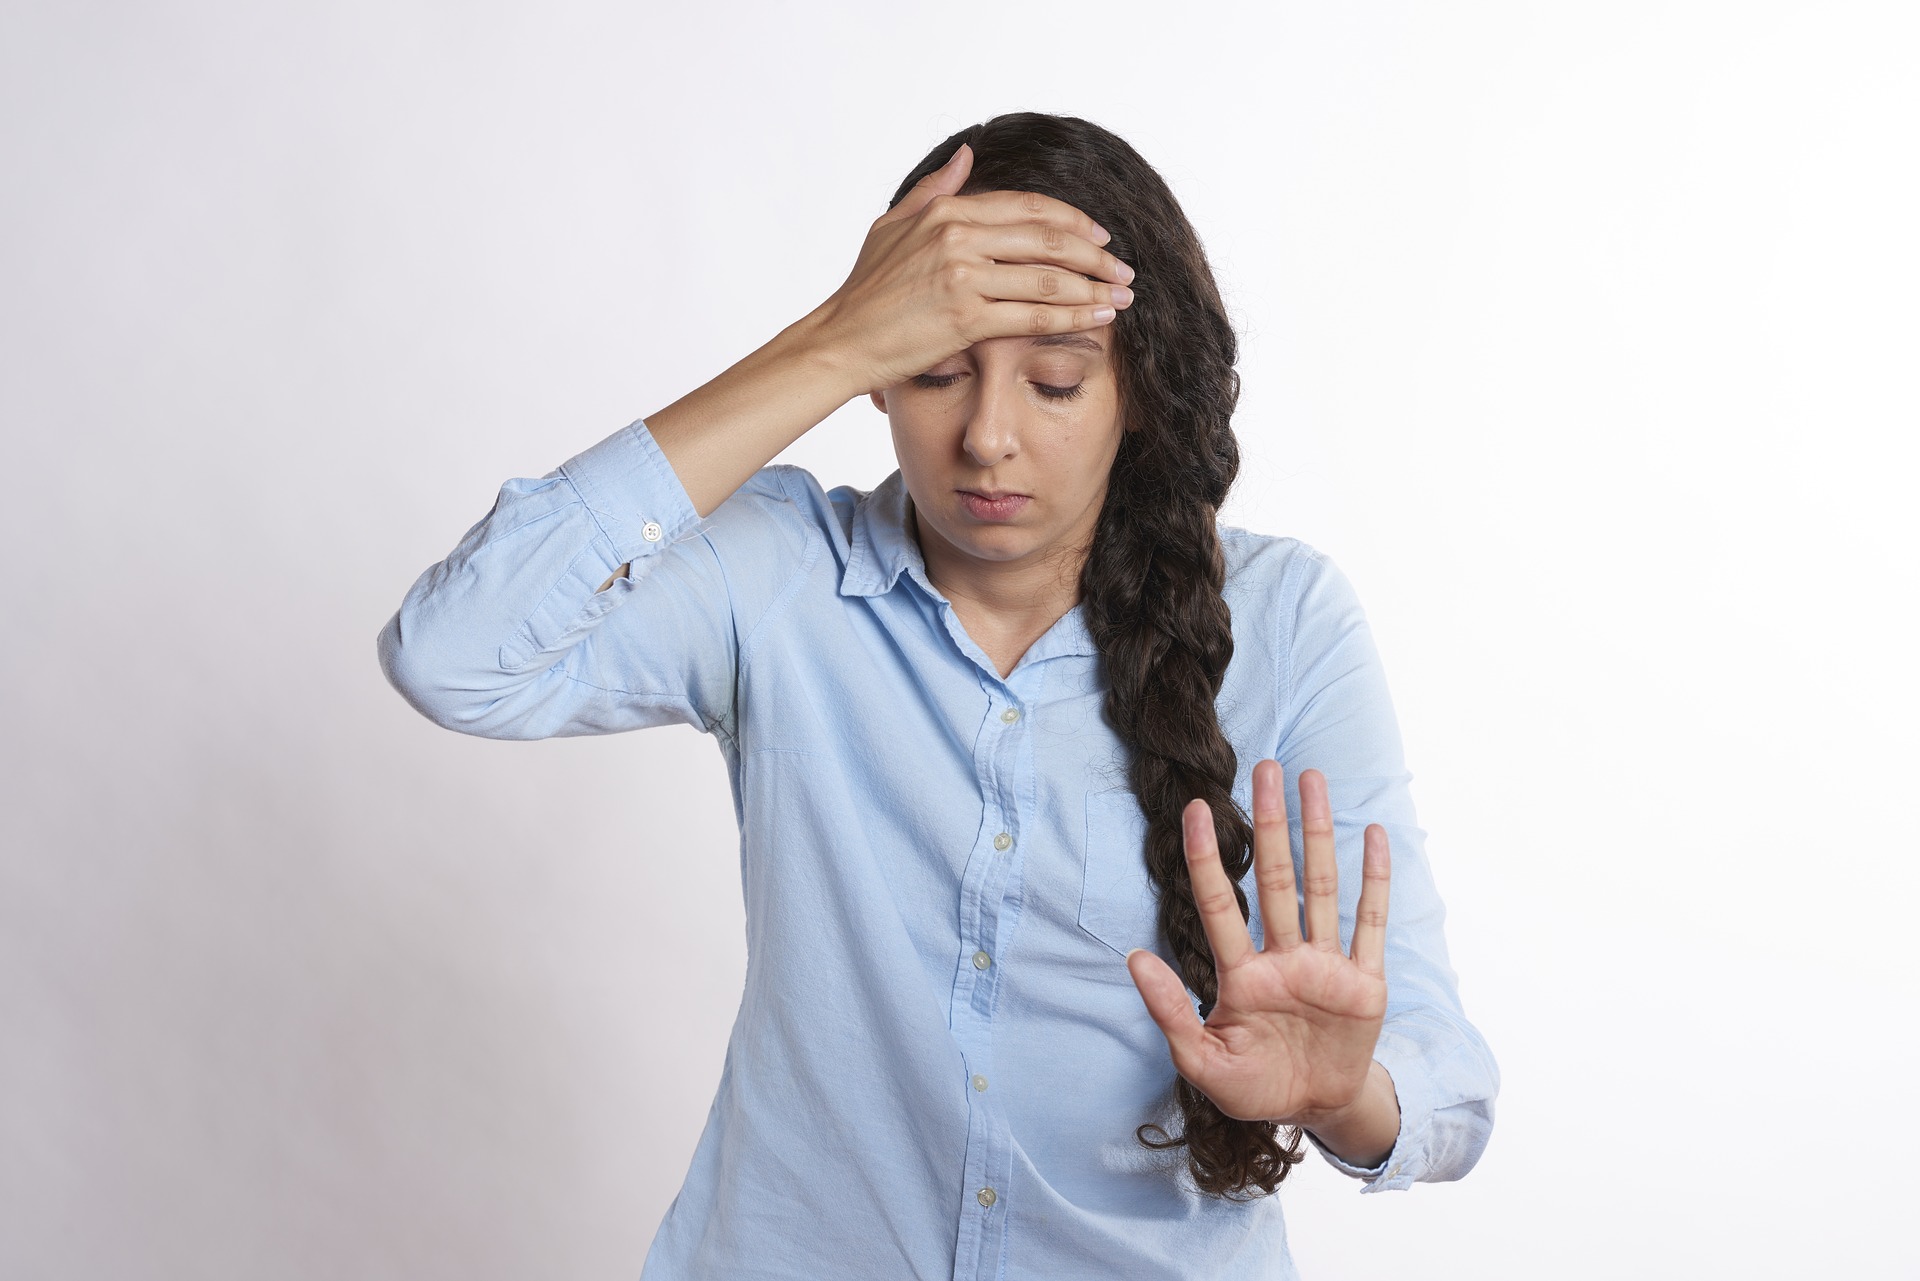 How Does Chiropractic Care Help with Headache Relief?